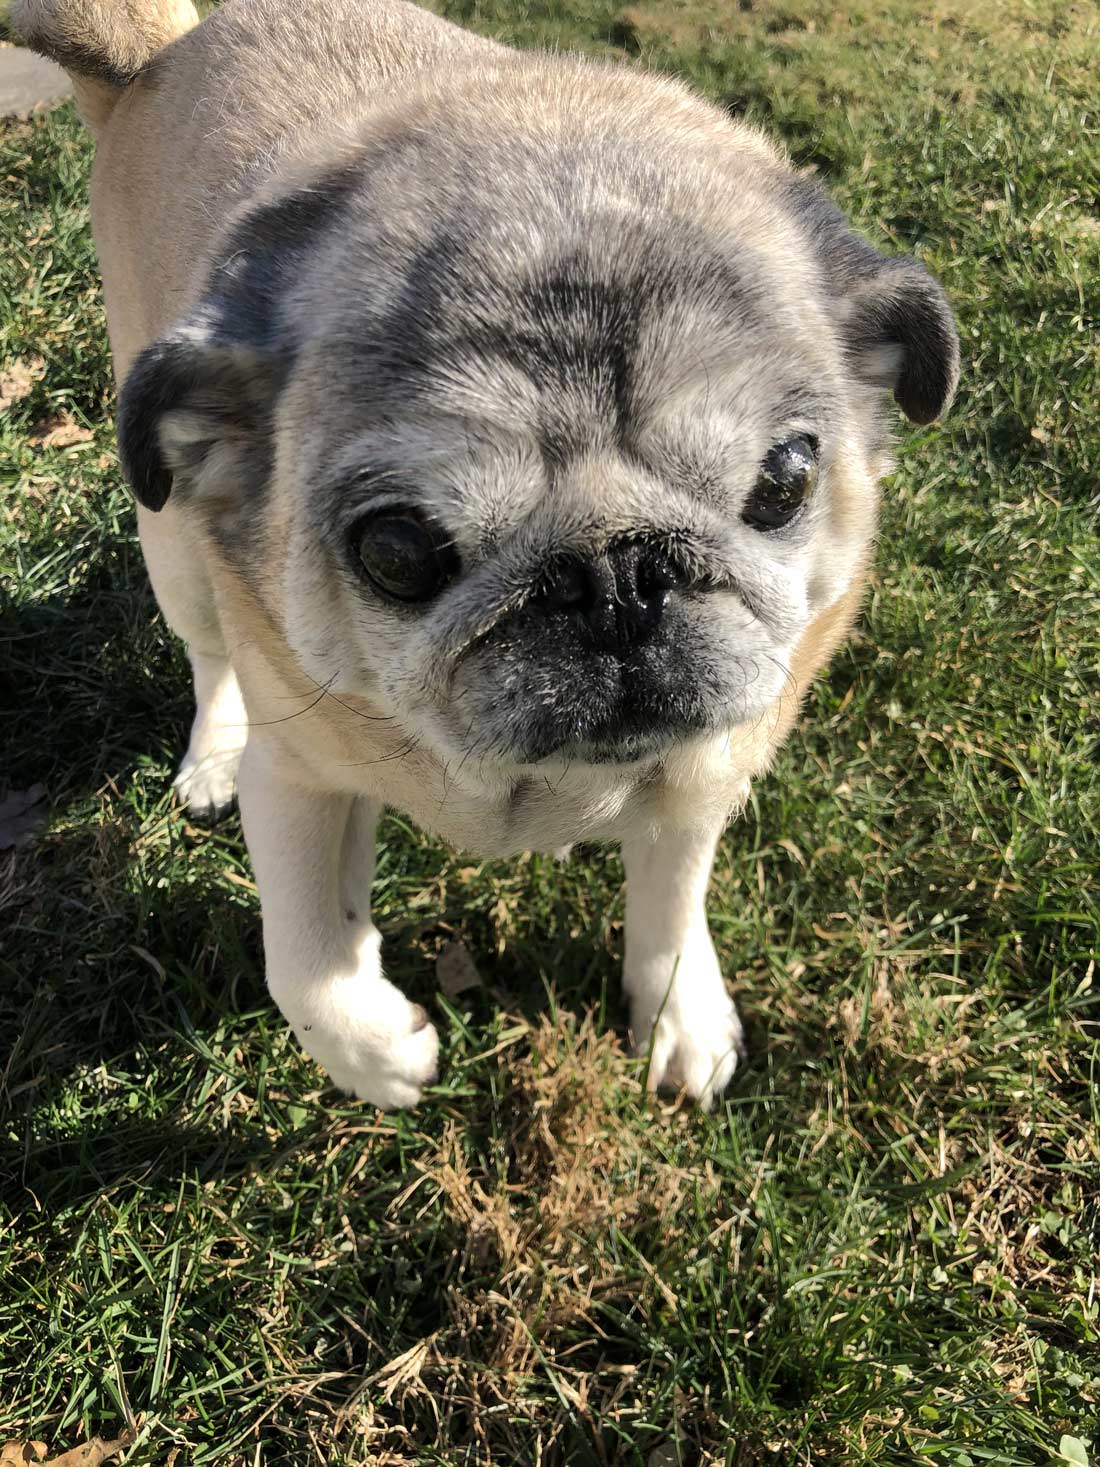 Cathy M. from Long Island, NY sent in a photo of her 13-year-old pug Teddy, taking a gingerly walk outside in the cool weather. Teddy likes to eat vegetables and fish. He also likes to rub his face in the grass.